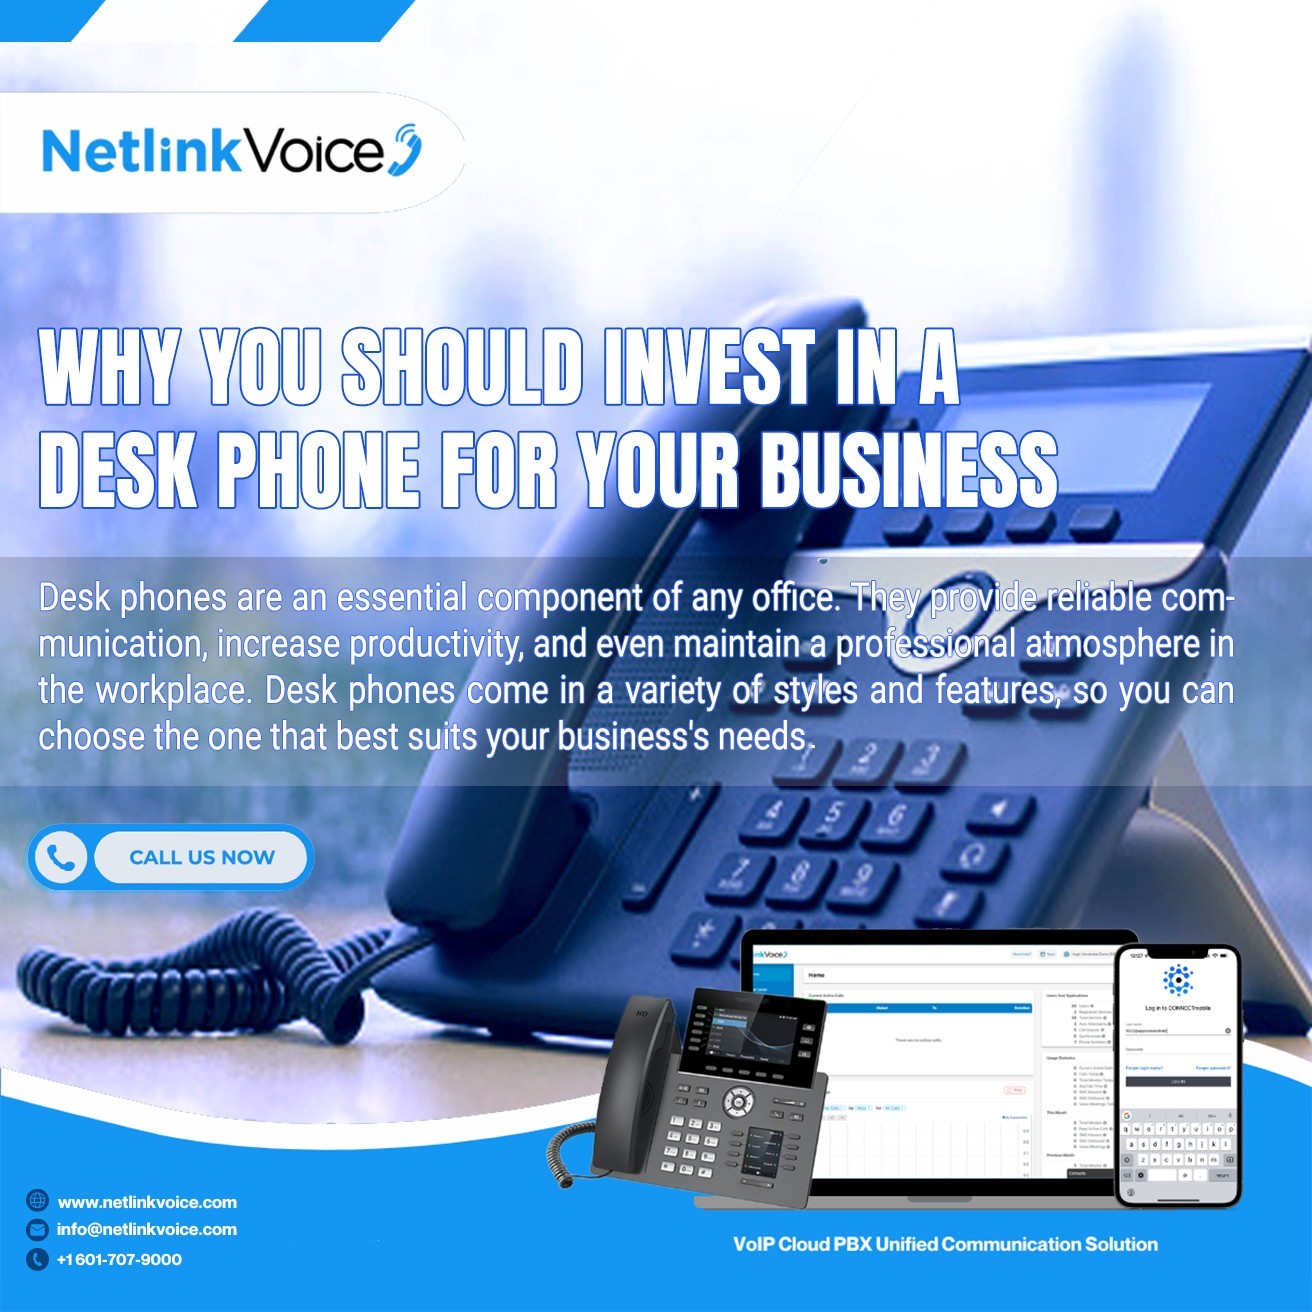 Why You Should Invest in a Desk Phone for Your Business